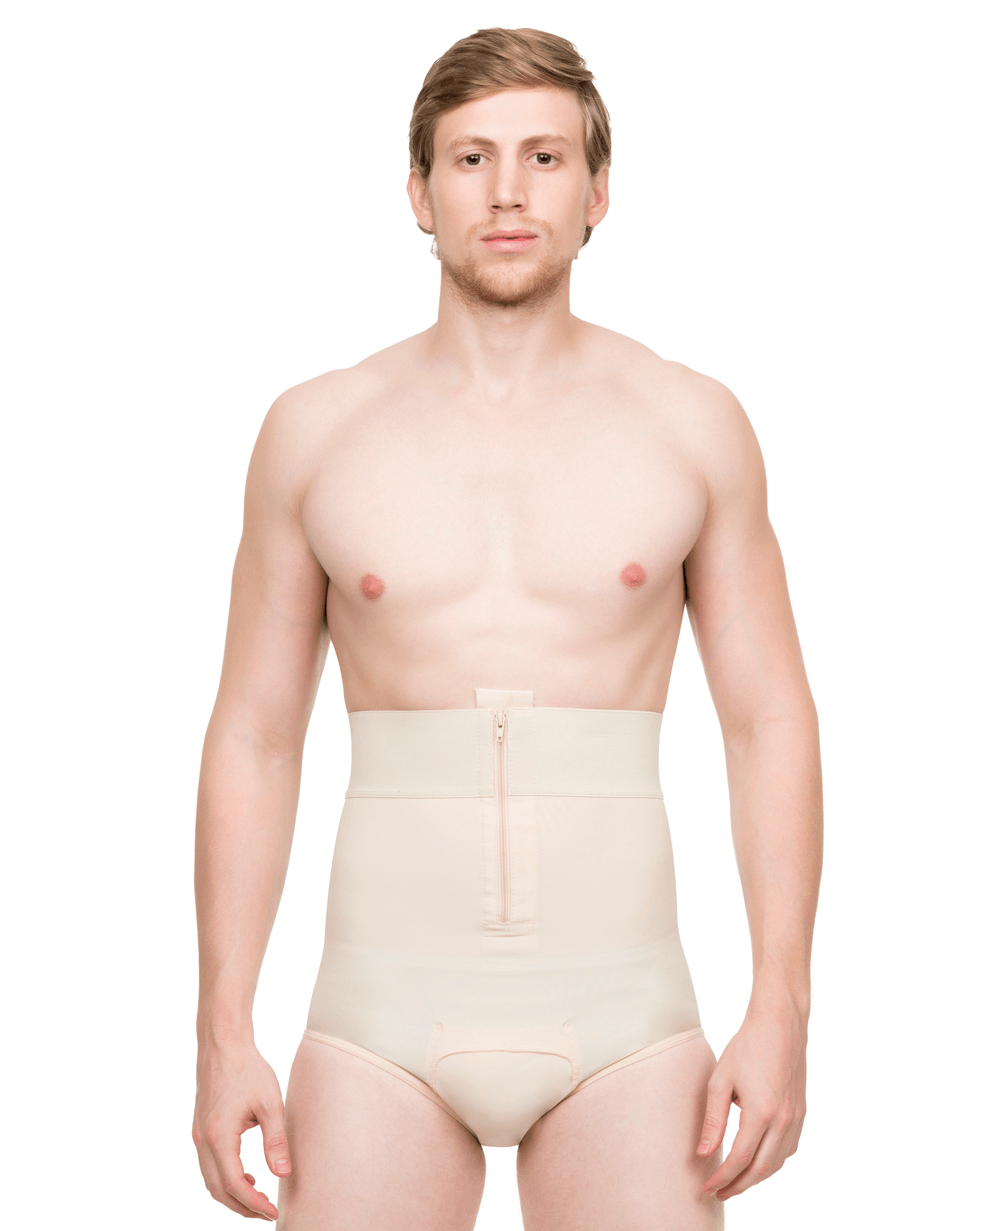 Male High-Waist Abdominal Cosmetic Surgery Compression Brief with Zipp